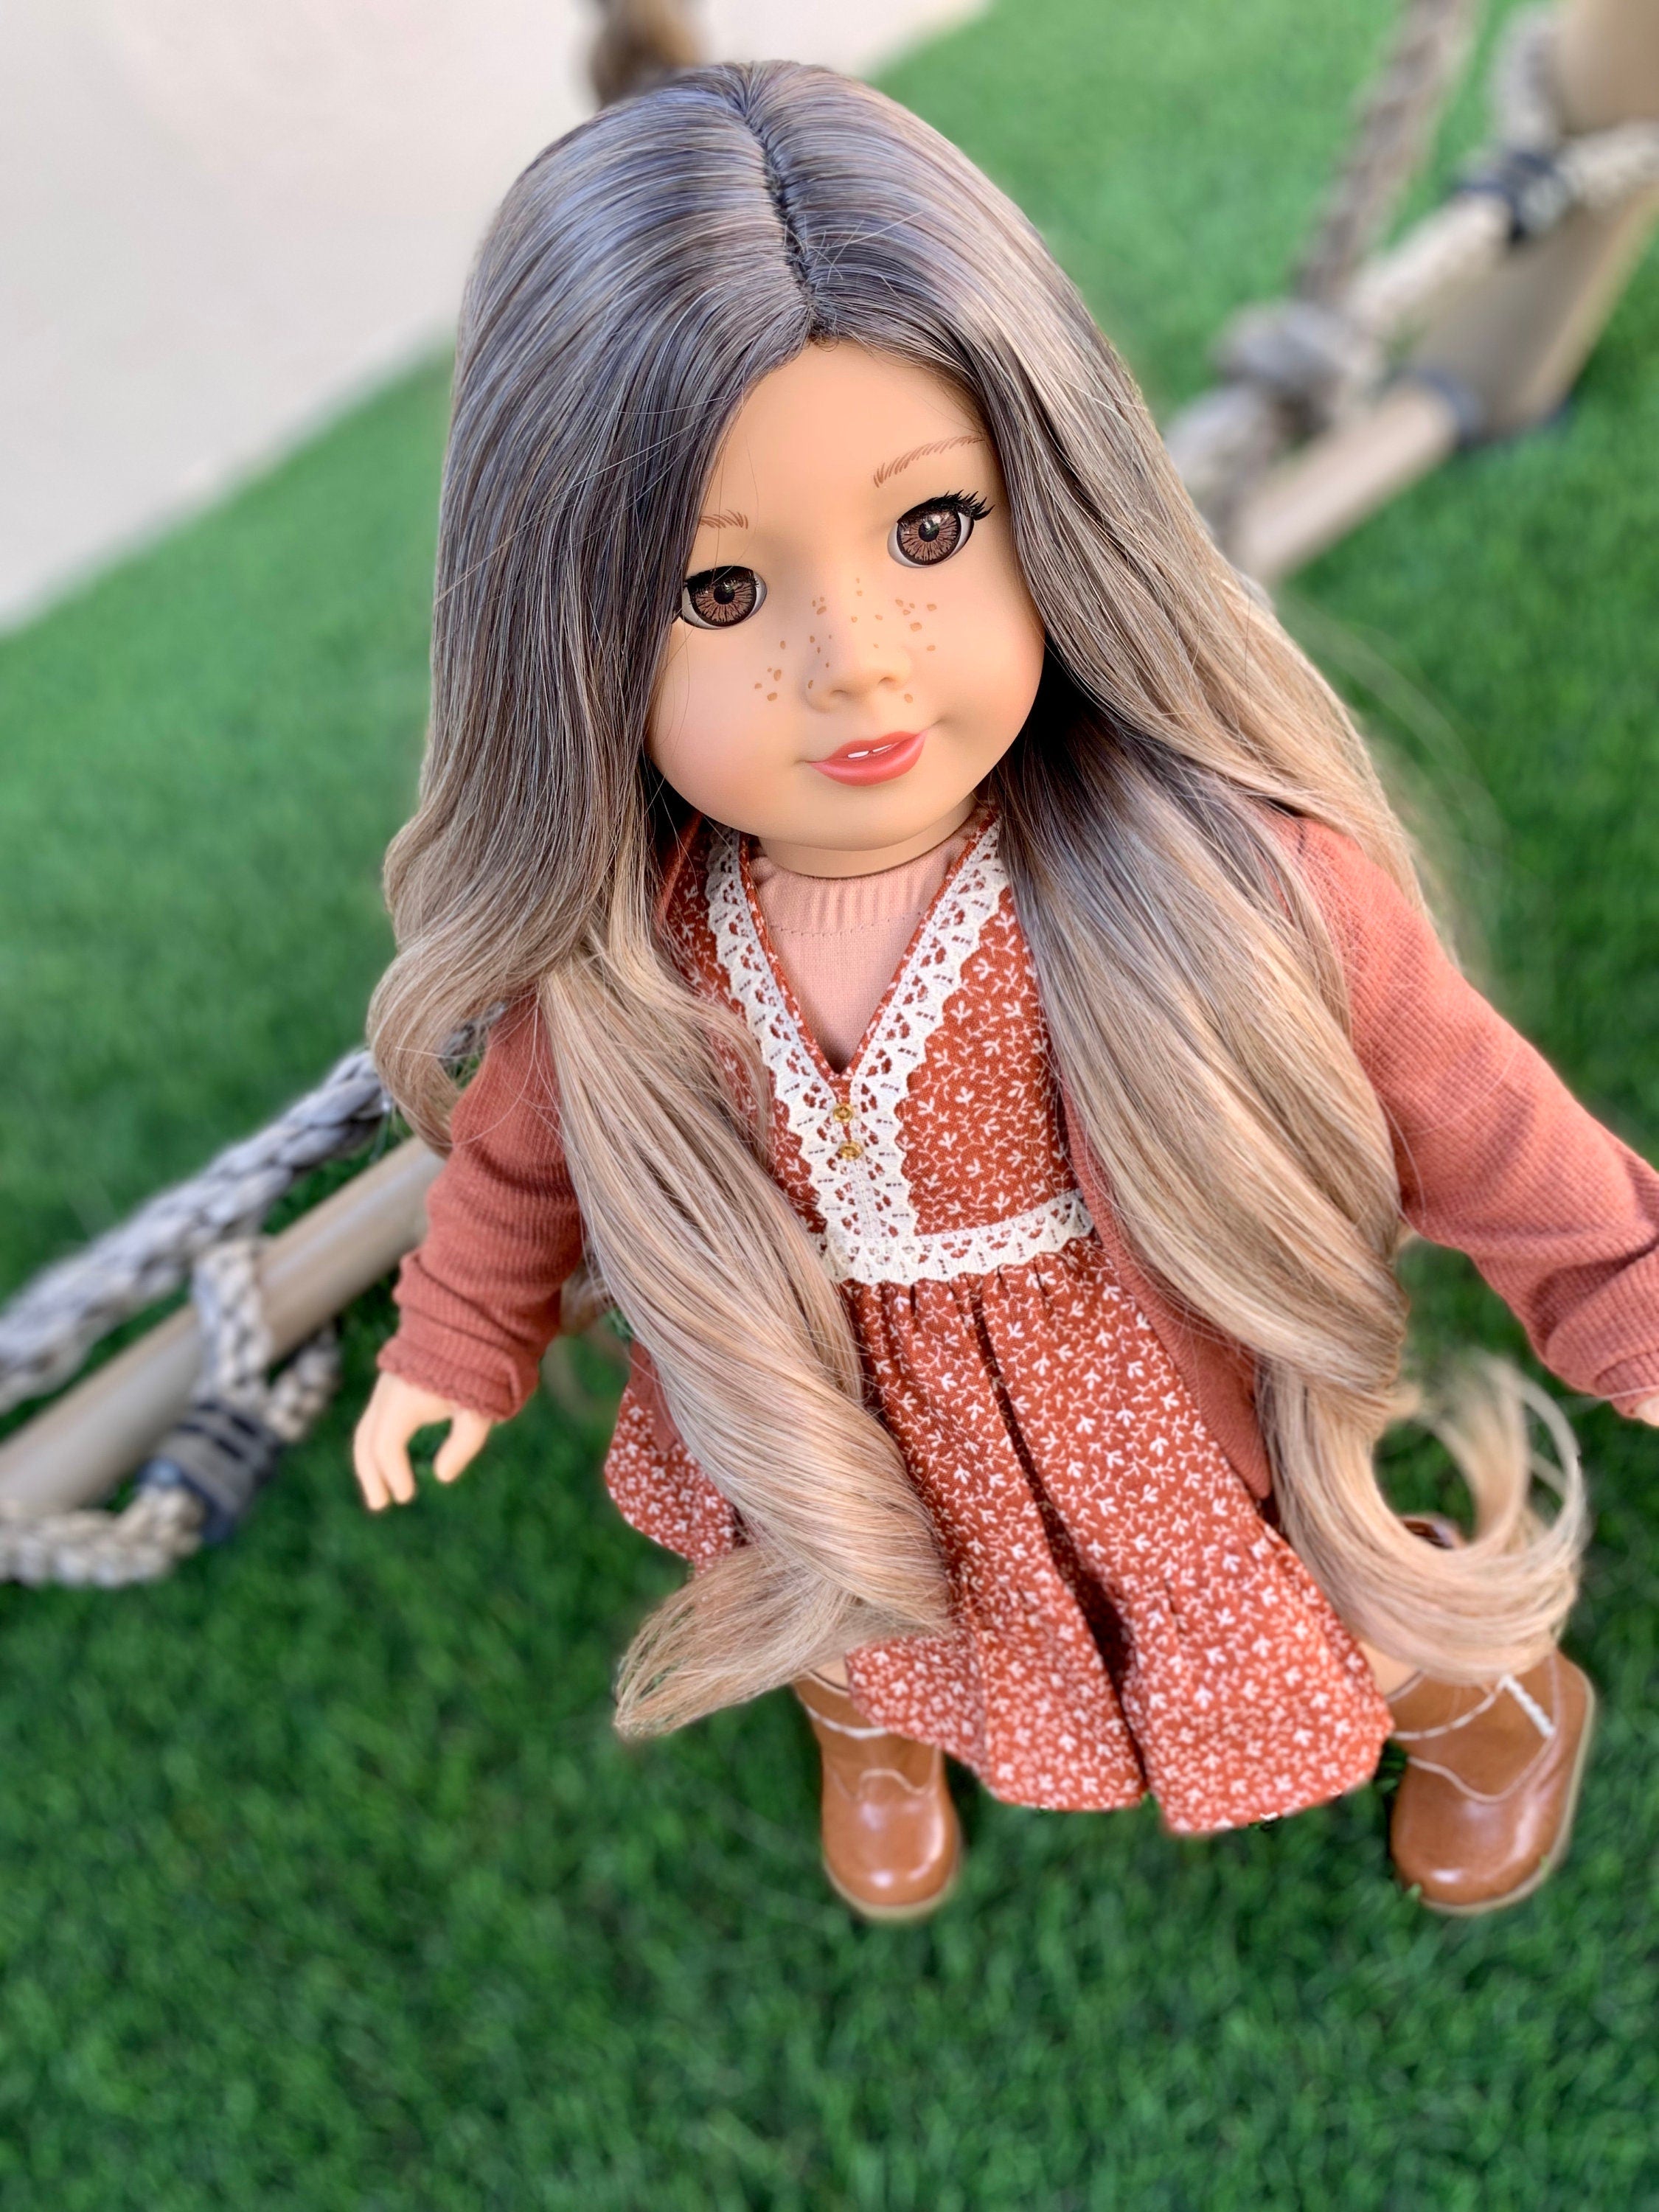 Custom doll wig for 18" American Girl Dolls-Heat Safe-Tangle Resistant-fits 10-11" head size of 18" dolls OG Journey Gotz Dyed Ombre